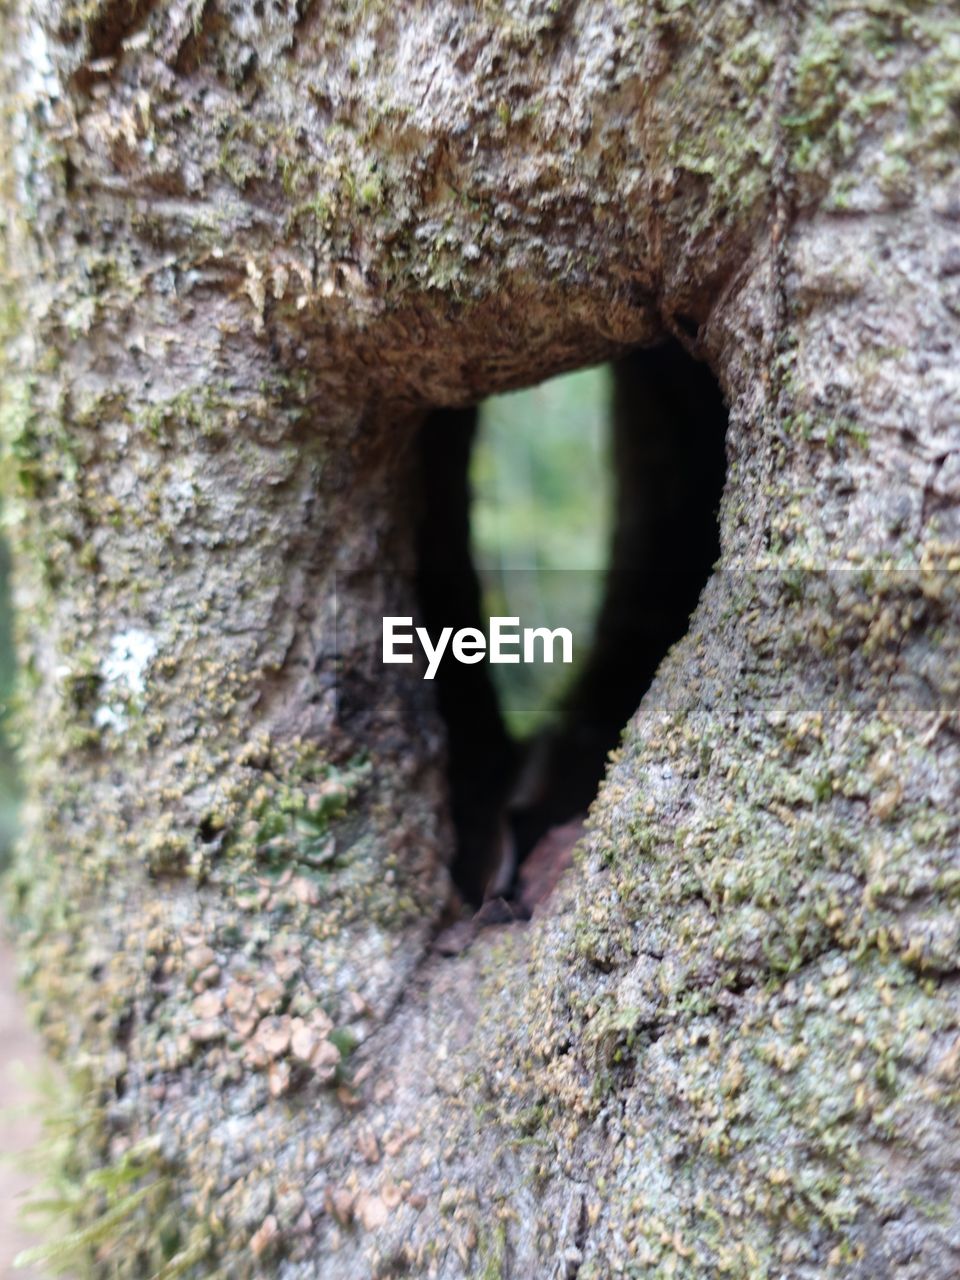 CLOSE-UP OF TREE TRUNK WITH HOLE IN BACKGROUND